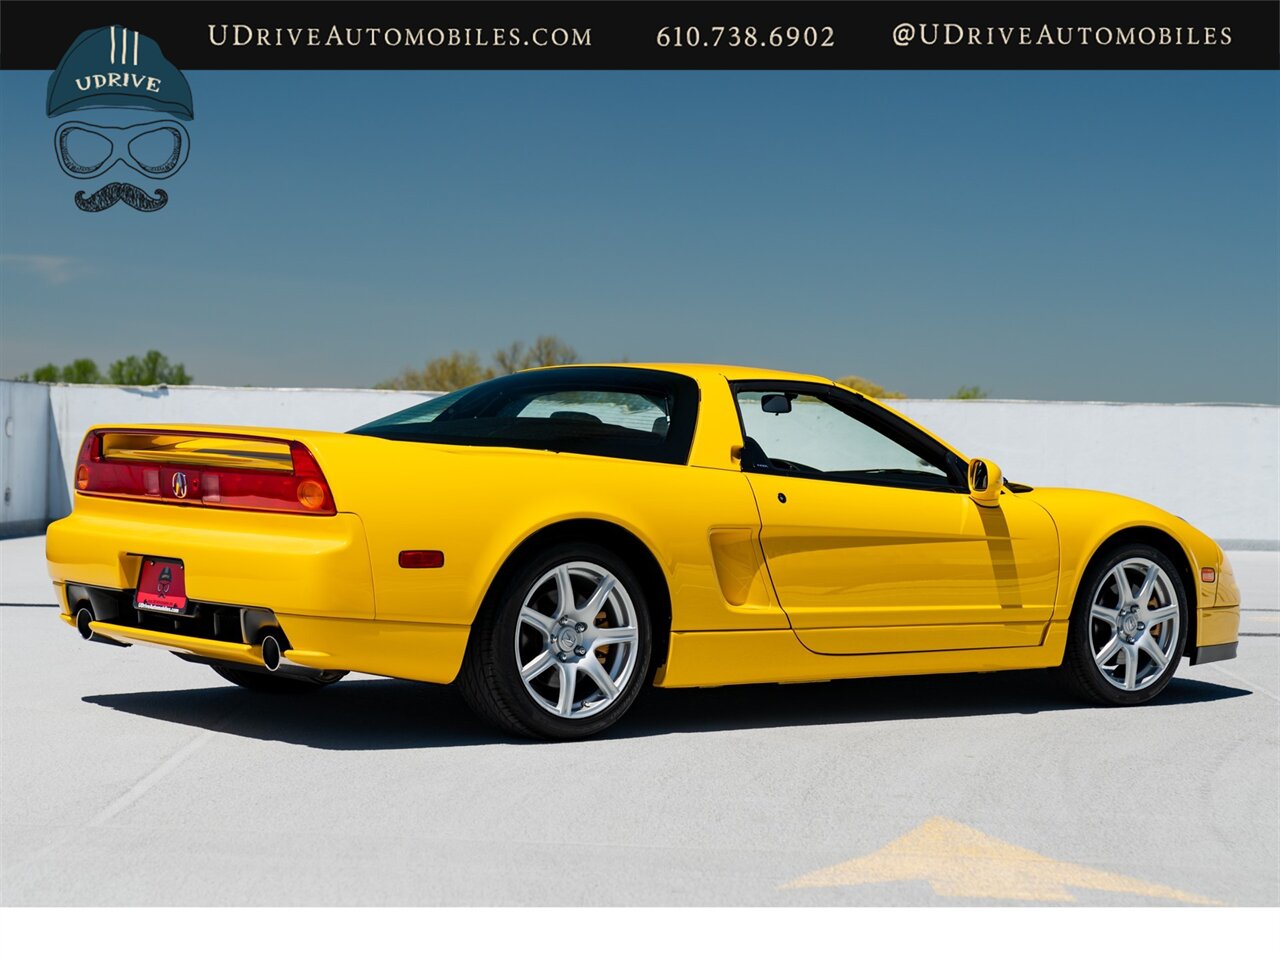 2003 Acura NSX NSX-T  Spa Yellow over Yellow Lthr 1 of 13 Produced - Photo 19 - West Chester, PA 19382